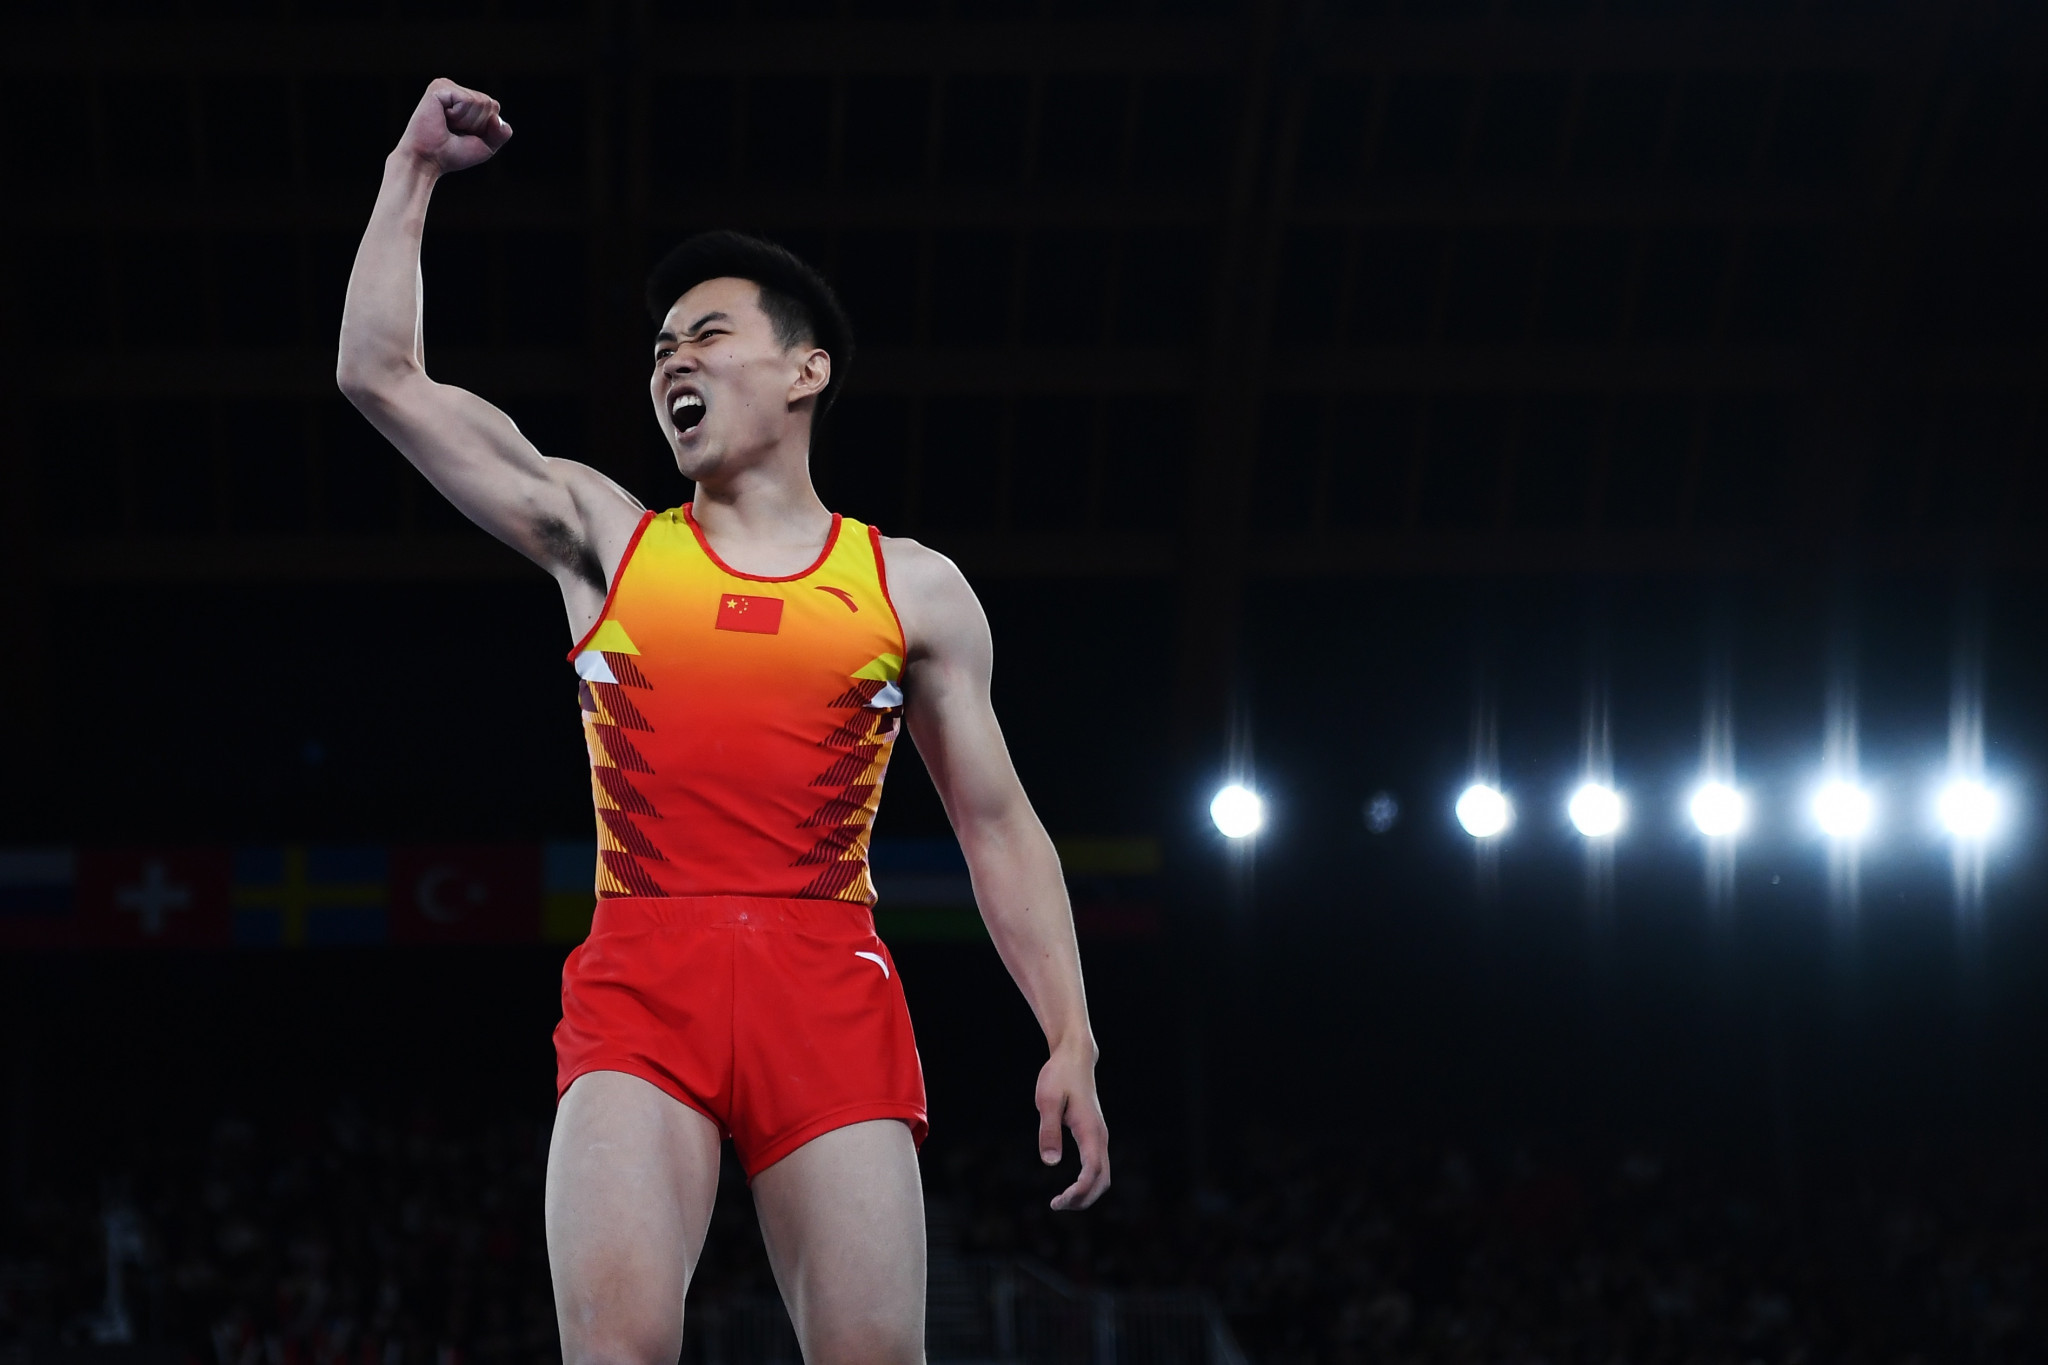 Gao Lei triumphed in the men's trampoline competition in Baku ©Getty Images